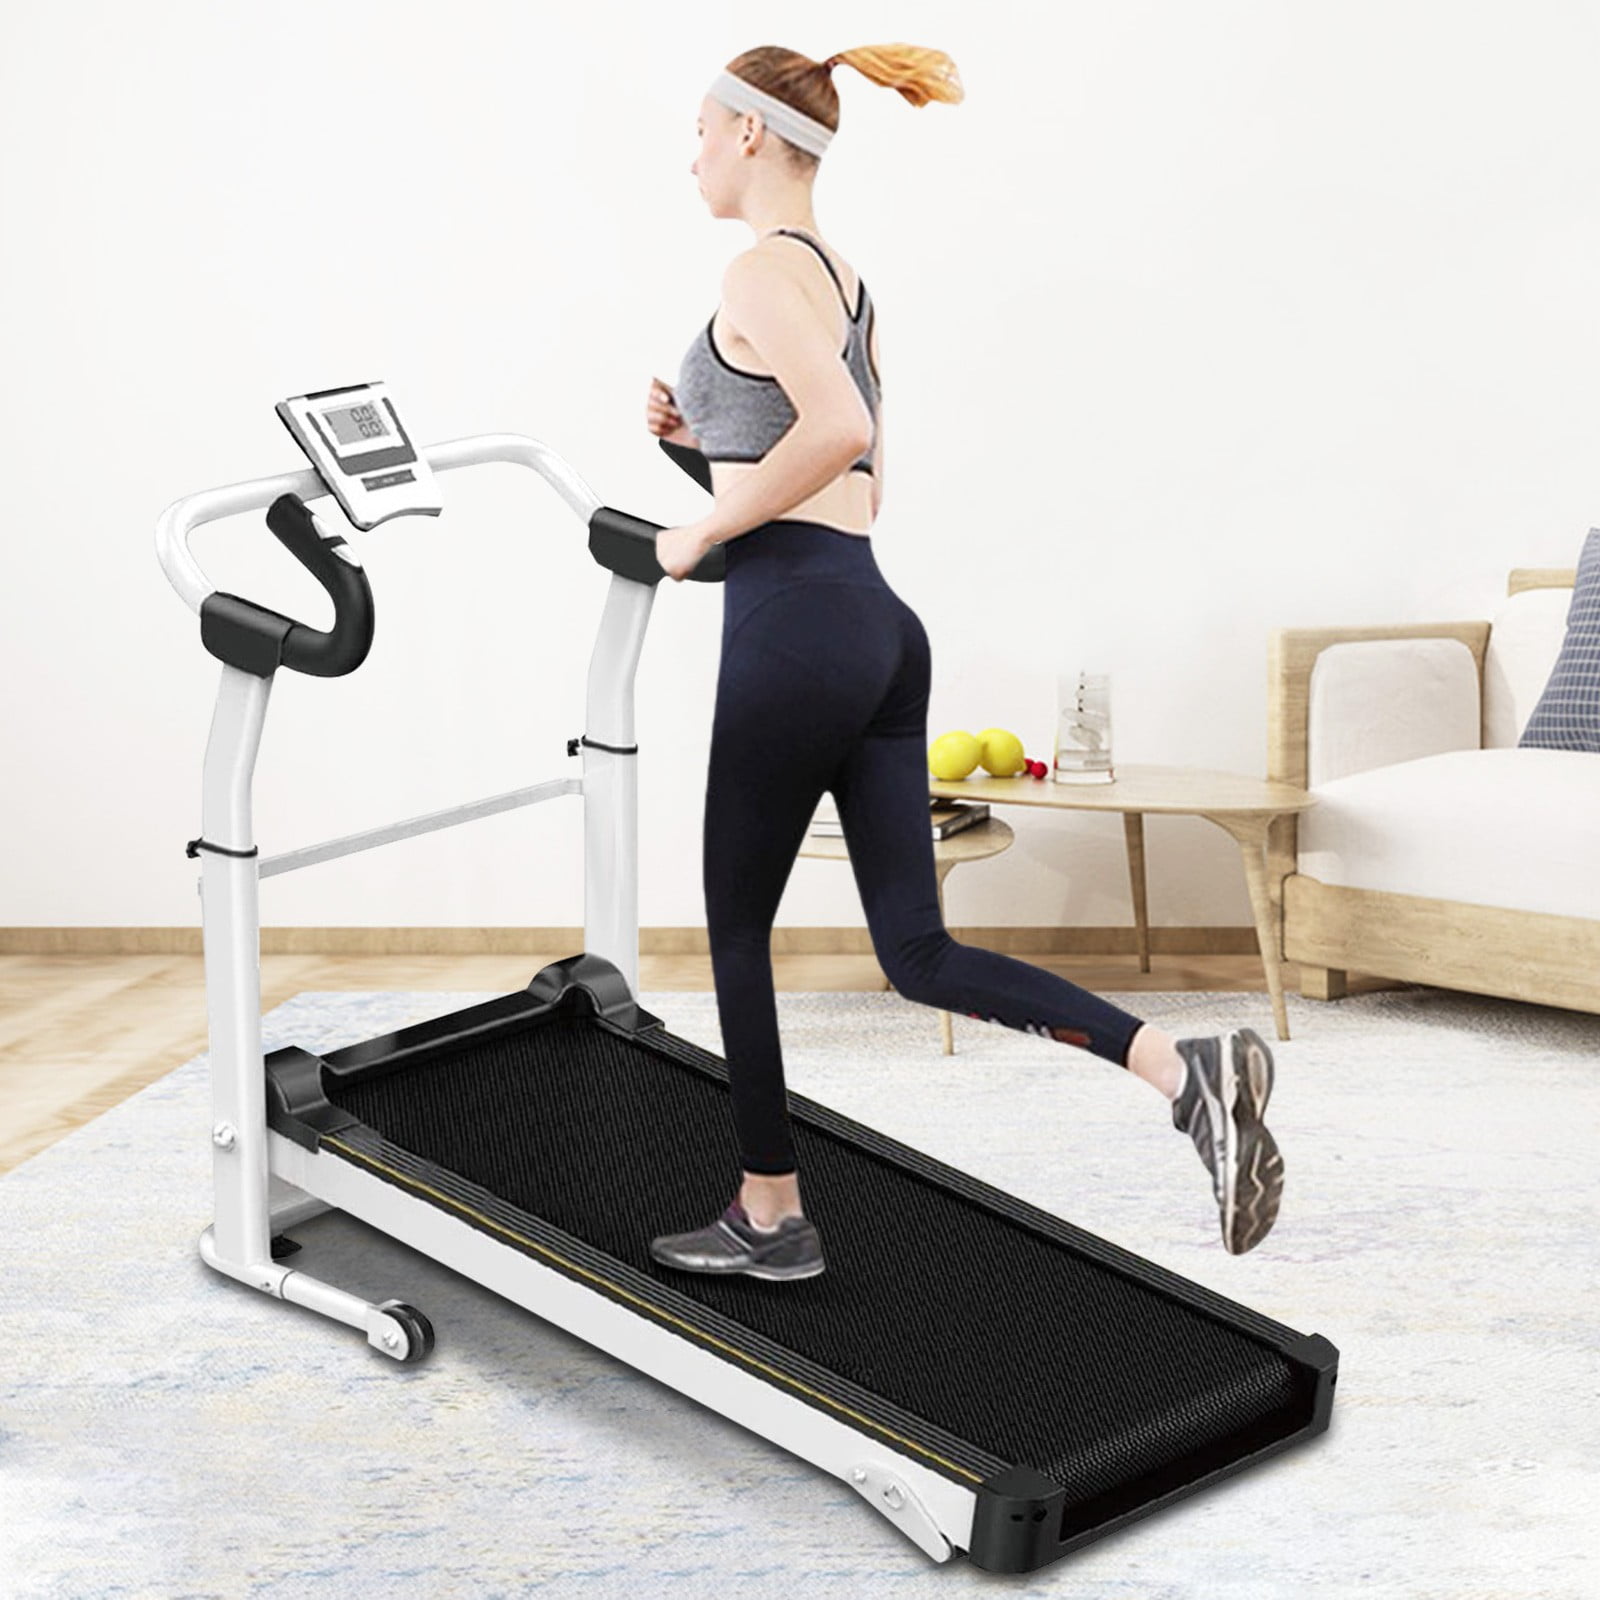 FUNMILY Treadmill for Home Electric Folding Treadmills with Music Speaker and Large Desk Portable Indoor Walking Jogging Fixed Incline Running Treadmill Machine for Home Gym Office Workout 